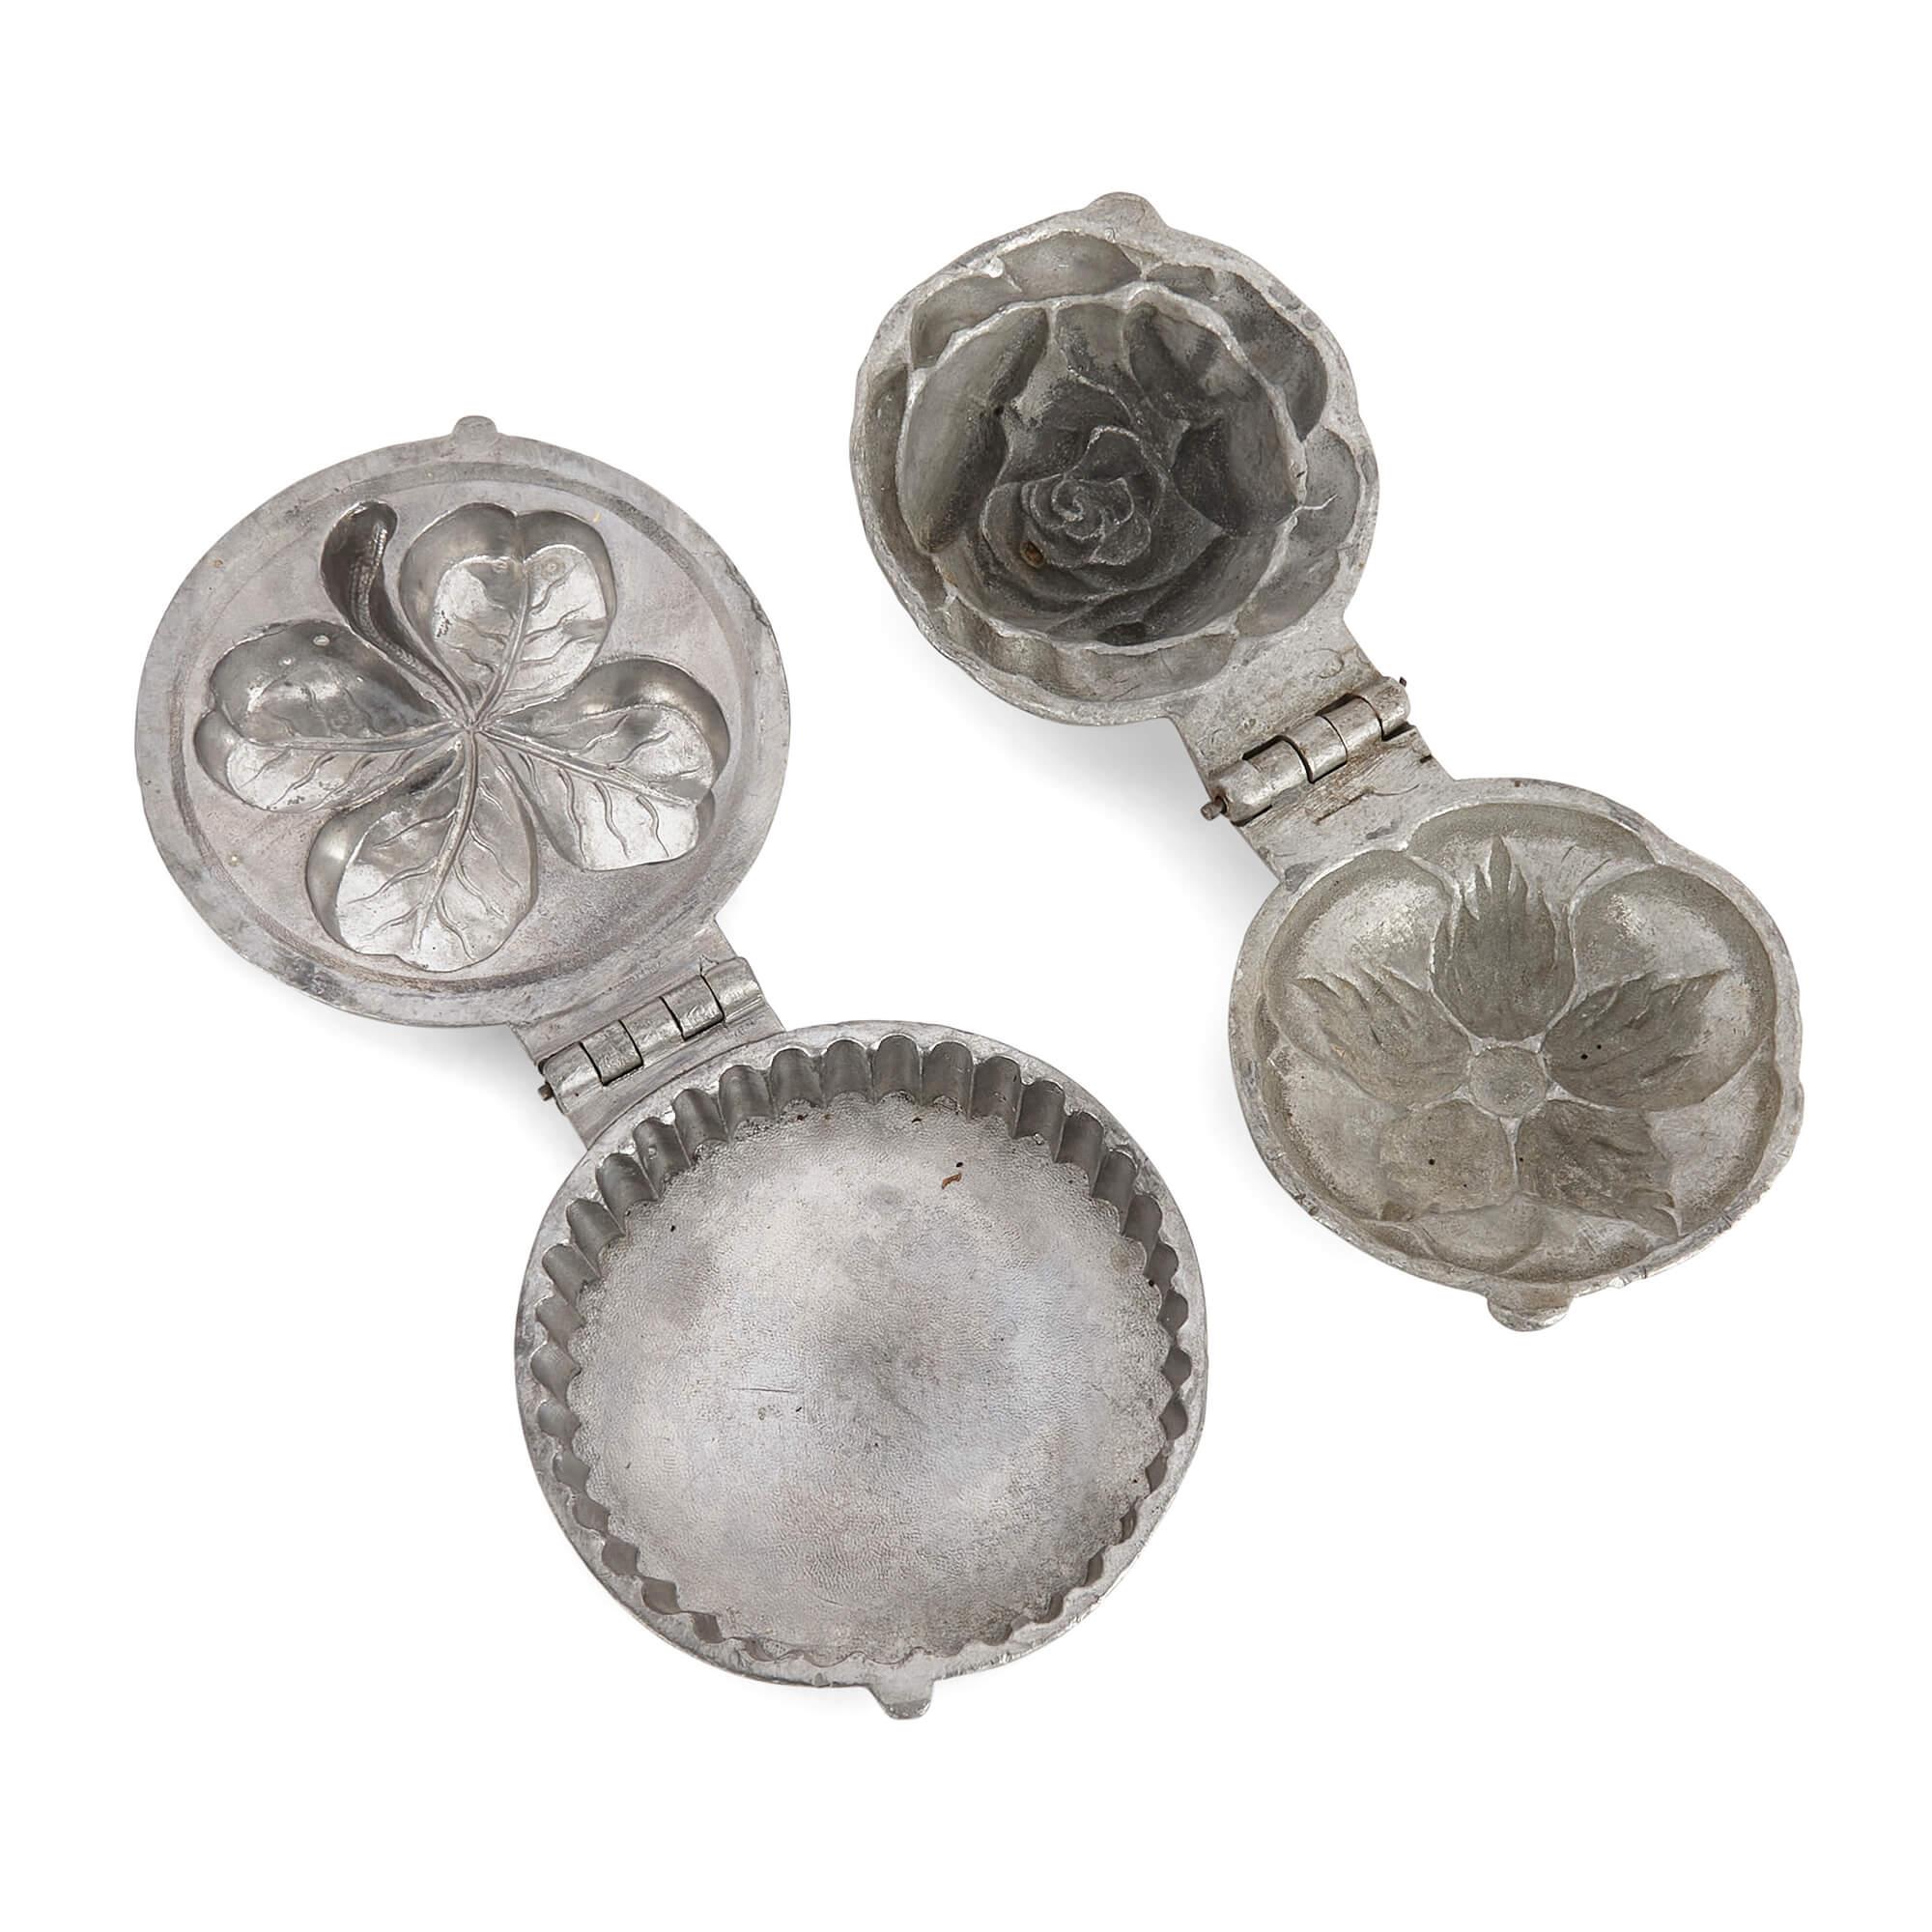 Collection of eight American pewter ice cream moulds 
American, Early 20th Century 
Largest: Height 11cm, width 9cm, depth 7cm
Smallest: Height 4cm, diameter 9.5cm

Popular from the mid-19th century onwards, ice cream moulds were seen as a way of